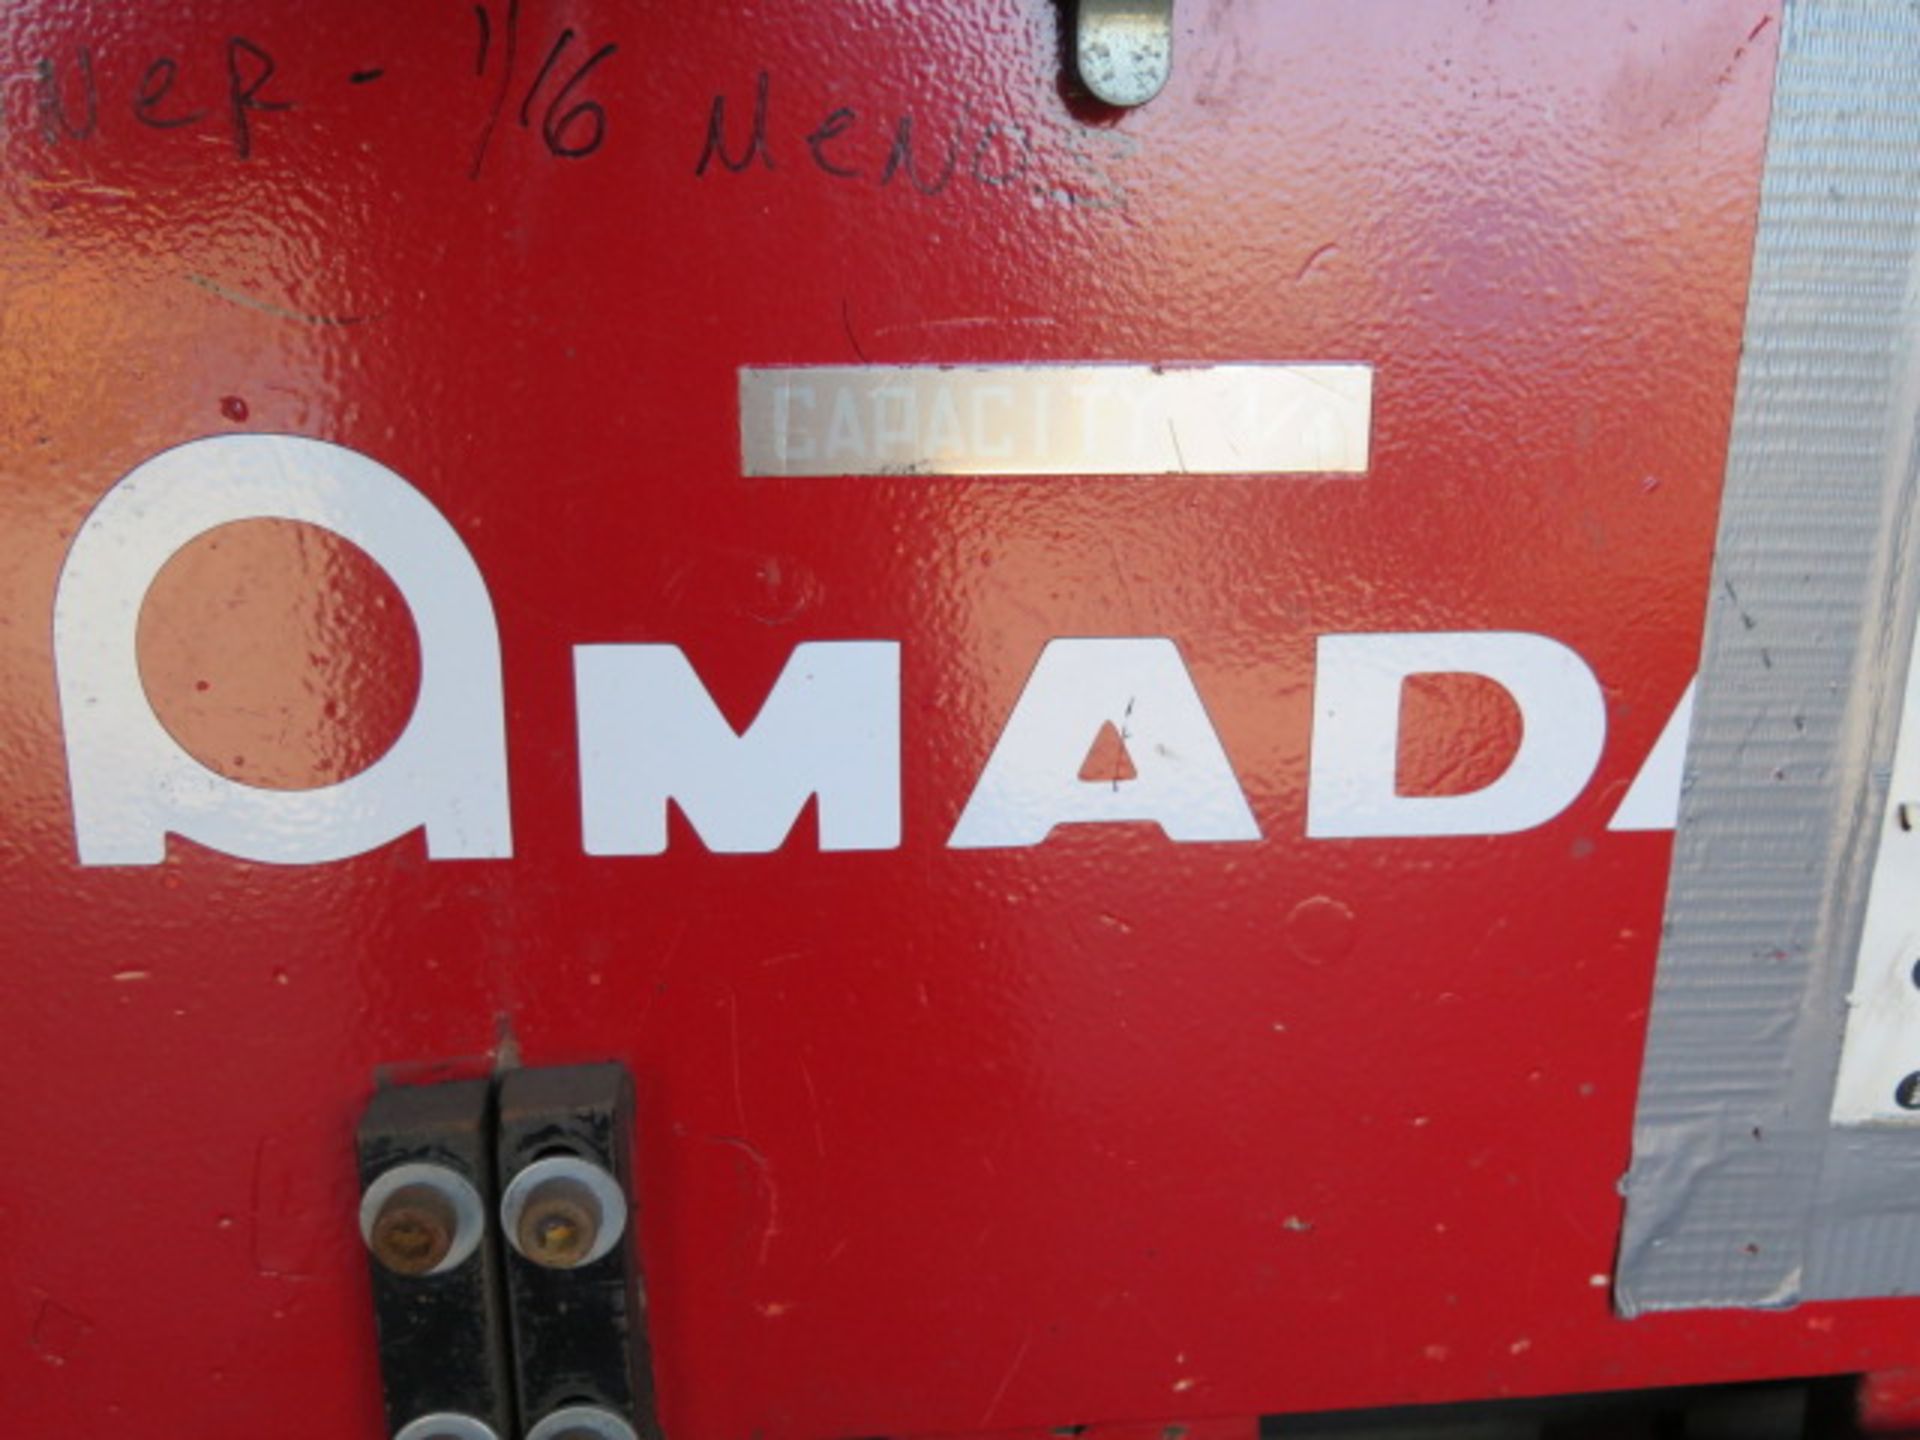 Amada M-2060 ¼” x 78” Power Shear s/n 20600705 w/ Amada Controls and BG, 88” Sq Arm, SOLD AS IS - Image 11 of 12